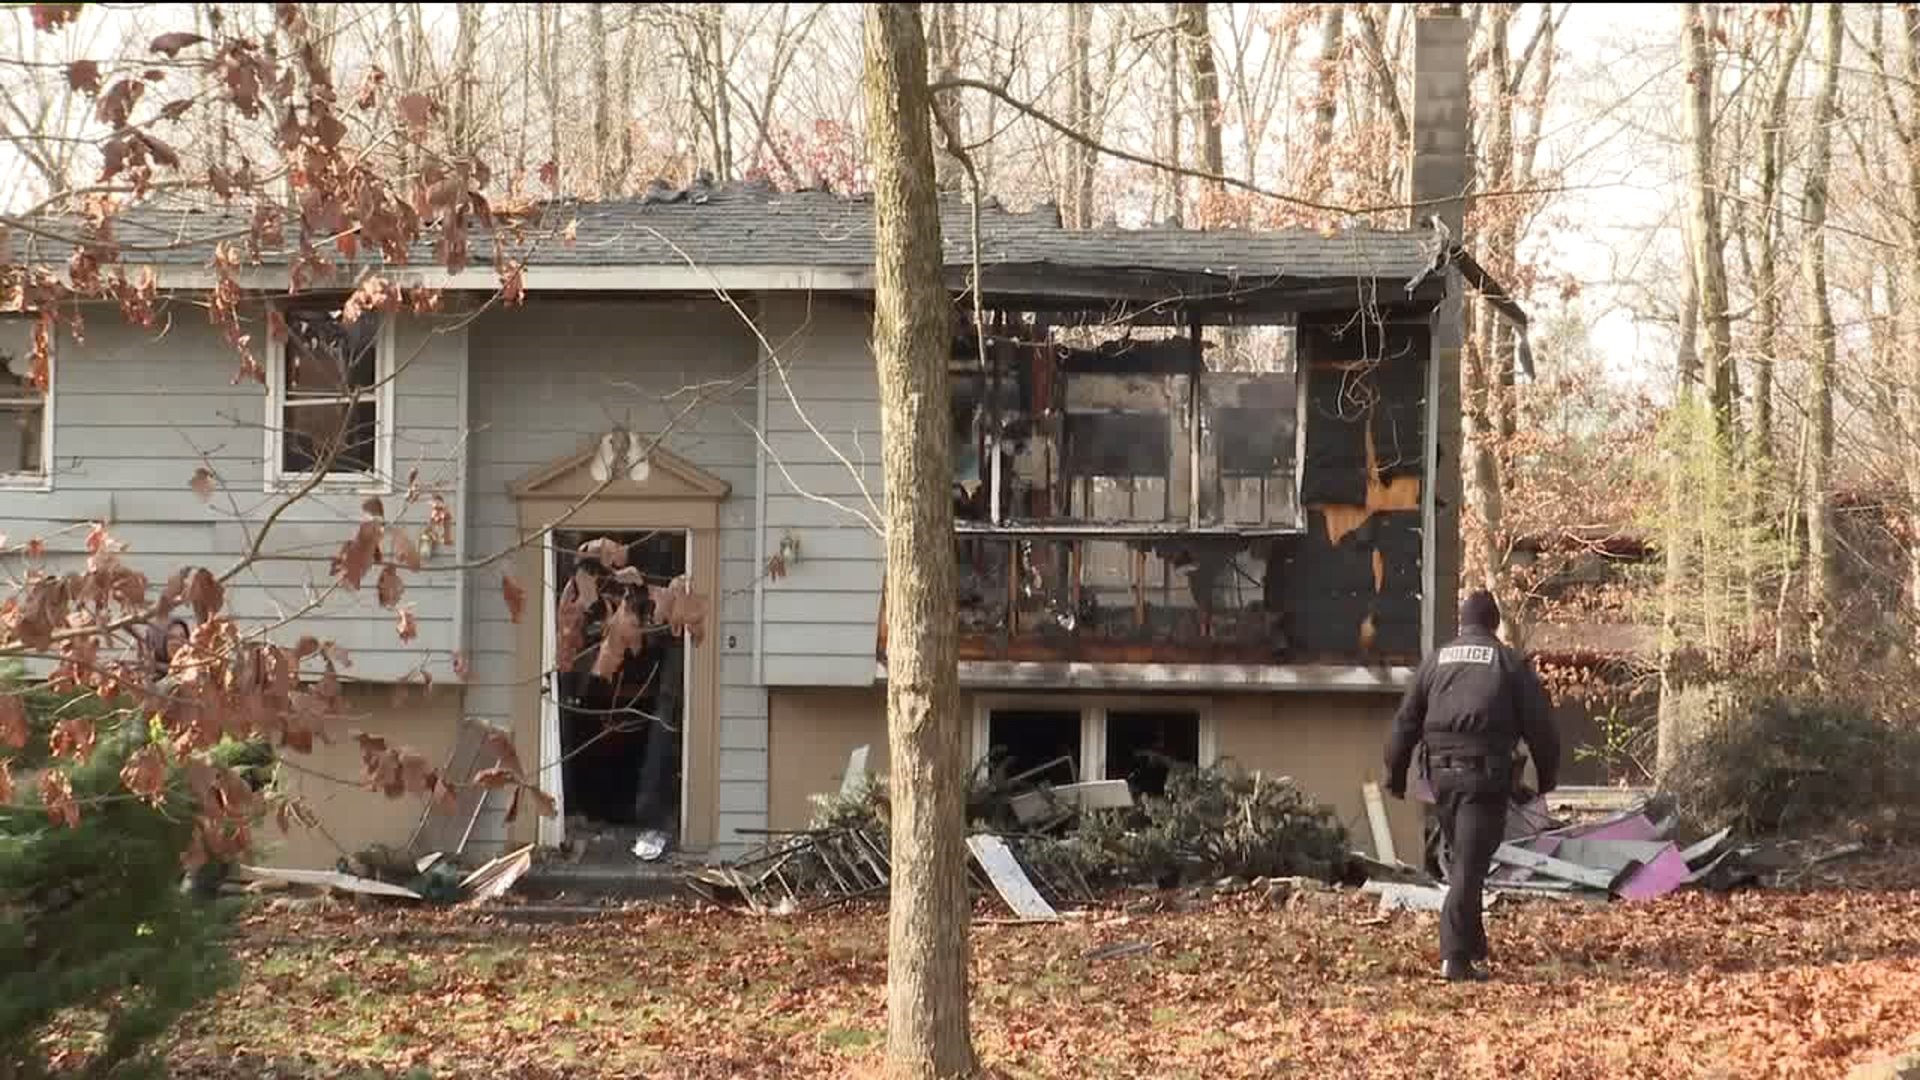 Fire in Schuylkill County Ruled Accidental